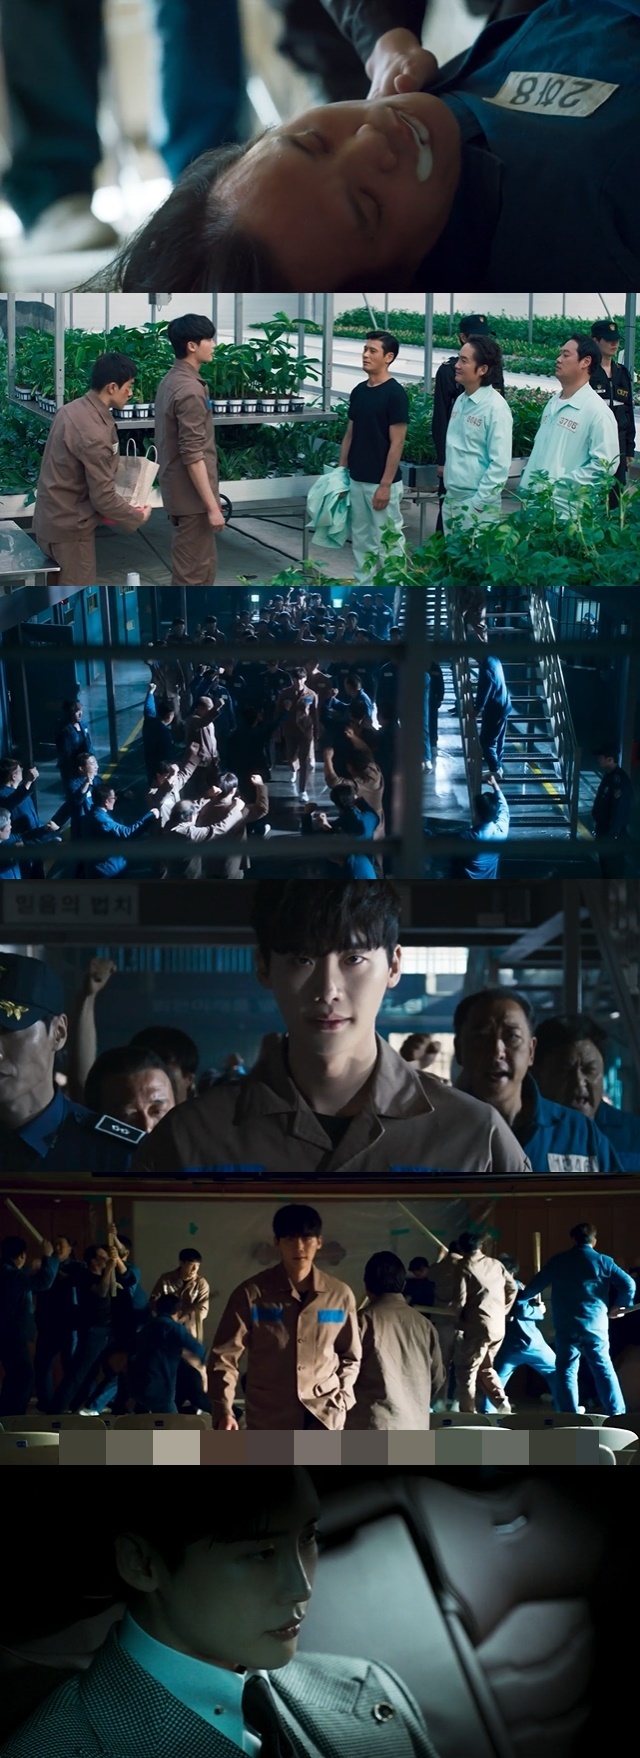 Lee Jong-suks reversal was foreseen, drawing attention from viewers.In the 4th episode of MBCs gilt drama Big Mouth (played by Kim Ha-ram/director Oh Chung-hwan and Bae Hyun-jin) broadcast on August 6, Dr. Chang-Ho (Lee Jong-suk) fell into Arlington Road, which was released by Gong Ji-hoon (Yang Jing Yuan).On this day, Gong Ji-hoon came to see Dr. Chang-Ho as a person.He asked Dr. Chang-Ho to return 100 billion dollars in Lara Capital investment, asking him to name only five Drug customers that Big Mouth traded in the order of many transactions in order to test whether he was a real Big Mouth.Gong Ji-hoon gave time until the weekend and said, If you can not name your customer that day, you are fake and then you die. Blackmail - Cinémix Par Chloé.Dr Chang-Ho, who was impatient, took the guards cell phone straight away and called Choi Doha.Then, I am not a big man who made me Big Mouth, but a real Big Mouth.I think I can not afford to touch the funds of the NR Forum fund, so I threw it as a prey. He said, Do you know that Big Mouth has a Roster who traded Drug?If Gong Ji-hoon doesnt call me five names, hell kill me. Hell have Roster from the prosecution. The mayor wants me to know.Earlier, Choi Doha had been handed over to his inspector and his henchman, Choi Jung-rak (Jang Hyuk-jin).Choi Doha questioned the connection between Gong Ji-hoon and Choi Jung-rak through a telephone conversation with Dr. Chang-Ho and investigated Choi Jung-rak.Meanwhile, Prison was tinged with fear of Big Mouth Dr Chang-Ho.The prisoners who had been able to attack Dr. Chang-Ho, including death row number 5362, were killed by extreme choices, such as hanging themselves in a punishment room or poisoning the cyanide during meals.Even rumors circulated that Big Mouth was controlling the soul.So Dr Chang-Ho said, Maybe Big Mouth might be in this (prison).Park Yungap, who felt Dangerous about the expansion of Dr. Chang-Hos forces, guessed that when you name the children you traded for Drug, I will believe that it is real (Big Mouth).But if you can not name it, you will die without knowing the rat or the bird in this. Diversions and Blackmail - Cinémix Par Chloé.Even to avoid the Park Yungaps hansom, Dr. Chang-Ho had to prove that the names of the five Drugbums were vs. Big Mouth.Choi Doha, who confirmed Choi Jung-raks betrayal, handed over the names of five drug traders to Dr. Chang-Ho through Ko Mi-ho (Lim Yoon-ah).There was also the idea that Dr. Chang-Ho, who desperately asked for help from himself, would not be the real Big Mouth.The problem was that this drug trade list was a fake made by Gong Ji-hoon. I did not make it.Im excited that those names are going to come out of Dr. Chang-Hos mouth.Dr. Chang-Ho When the name of the fake roster comes out of his mouth, Dr. Chang-Ho, Choi Doha both laughs meanly. He then delivered this fact to the three VIPs.Dr Chang-Ho, who does not know Gong Ji-hoons Arlington Road, responded to a bet with a VIP trio with 300 million stakes, with the content saying: Dr.Whether or not Chang-Ho knows Drugza Roster was the one who headed to the game board where his life was on the brink of support from his supporters.At the same time, Choi Doha, who noticed that Drugza Roster was a fake, hurried to the prson, but was blocked by traffic and created a Danger feeling.